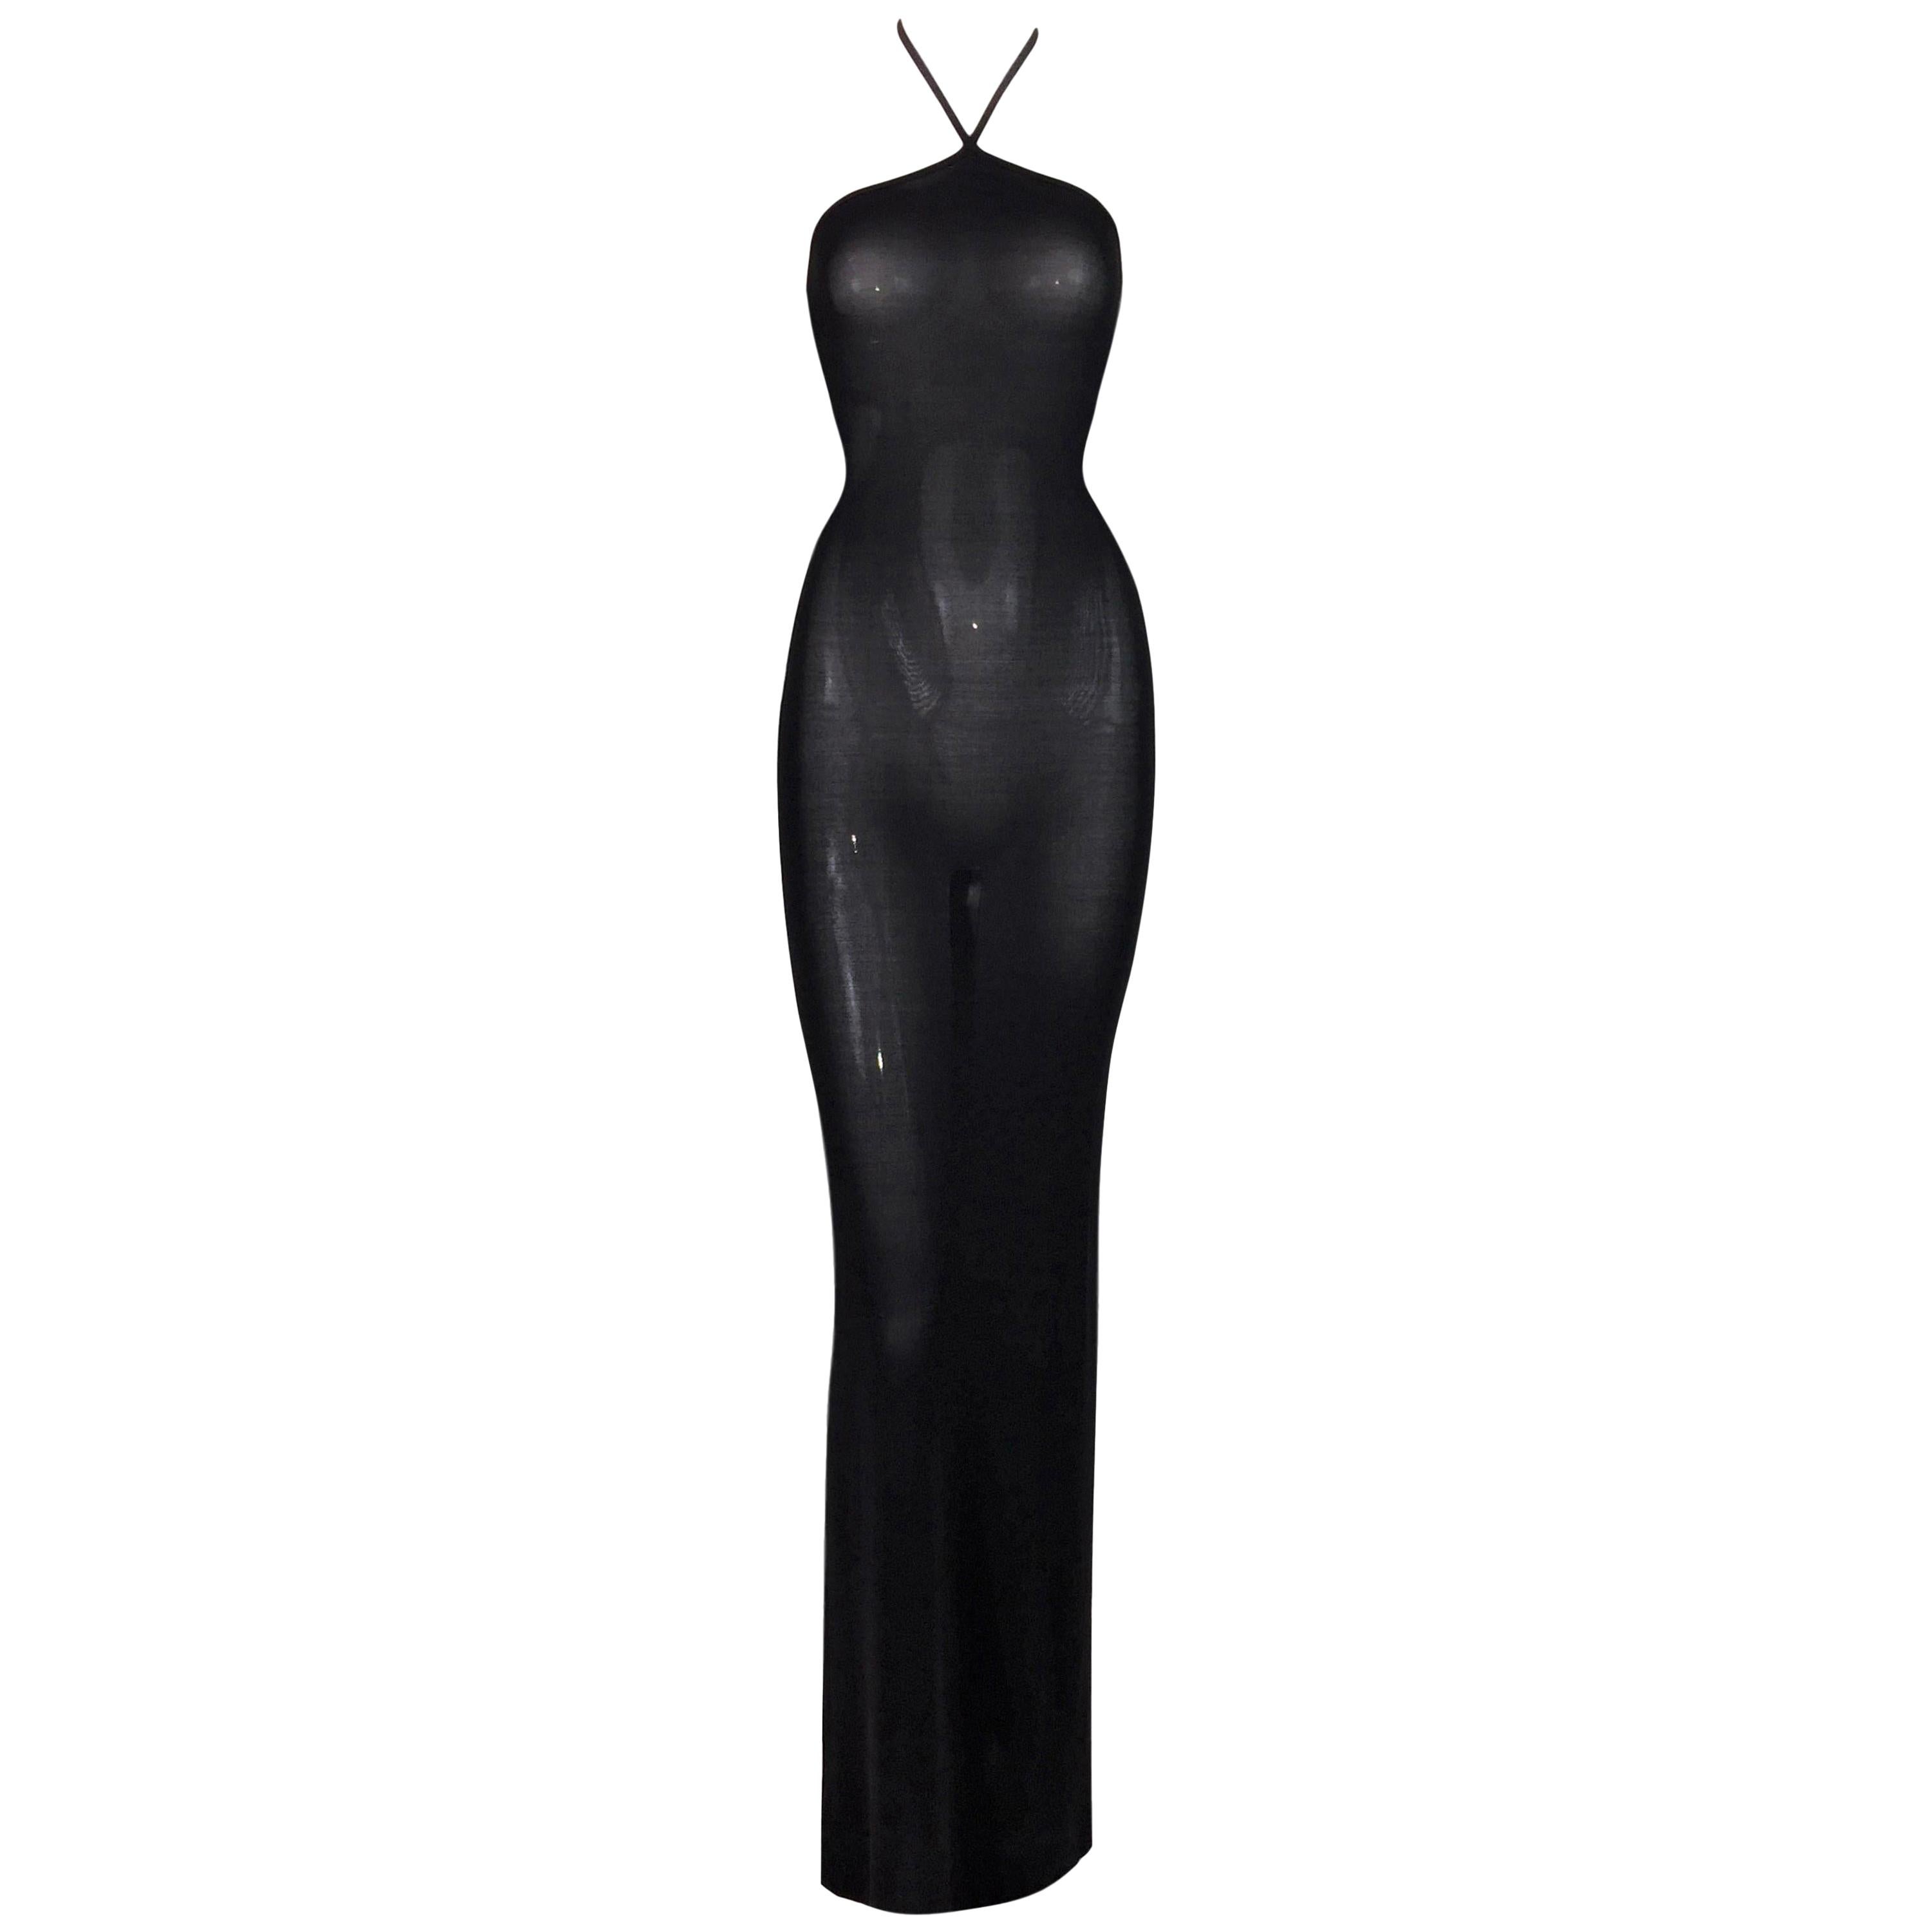 F/W 1996 Gucci by Tom Ford Sheer Black Halter Wiggle Gown Dress